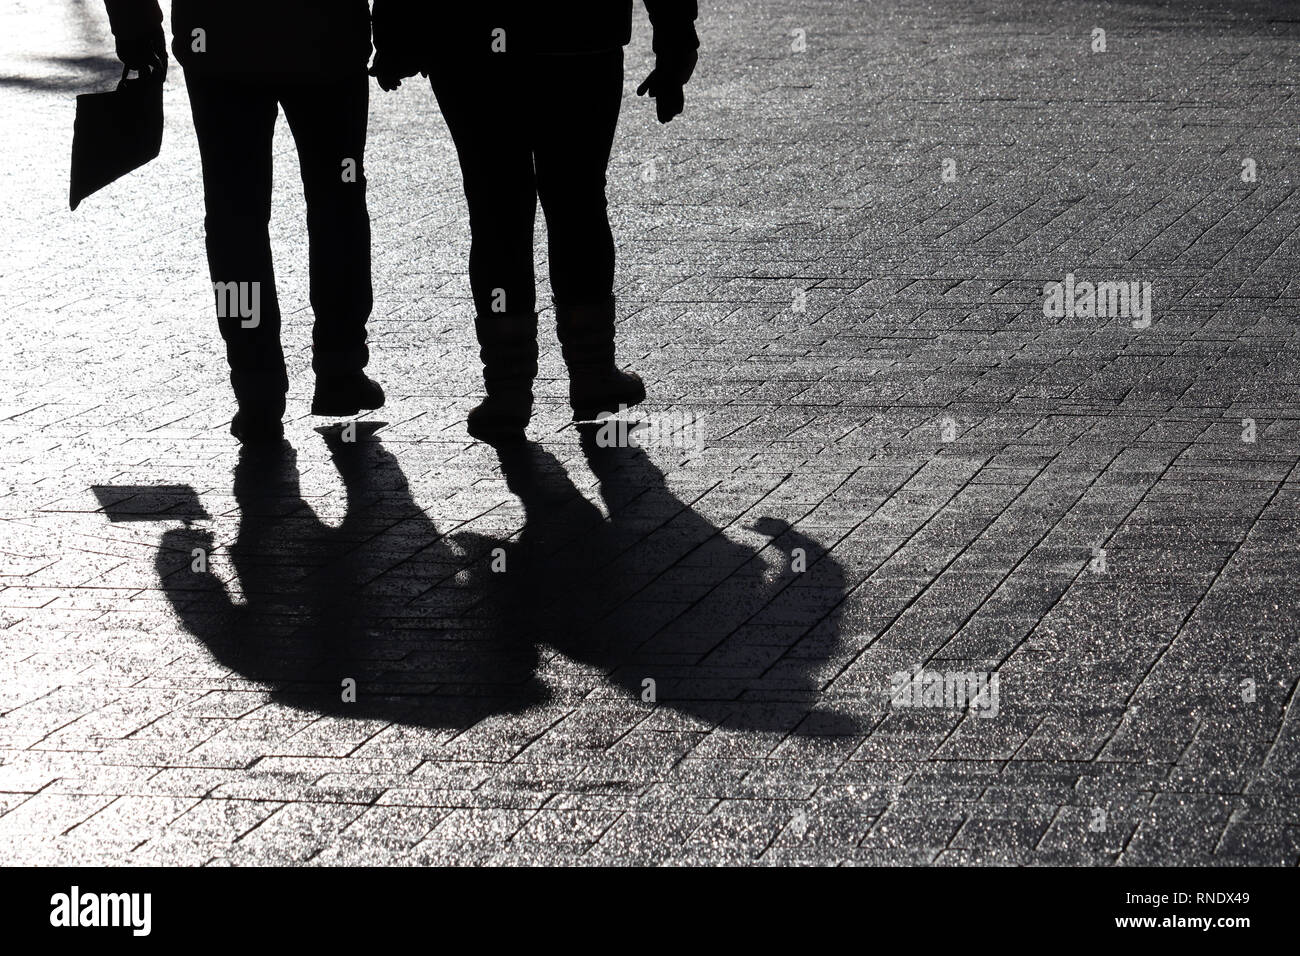 Silhouettes of two people walking down the street. Couple outdoors, people shadows on pavement, concept for for dramatic stories Stock Photo